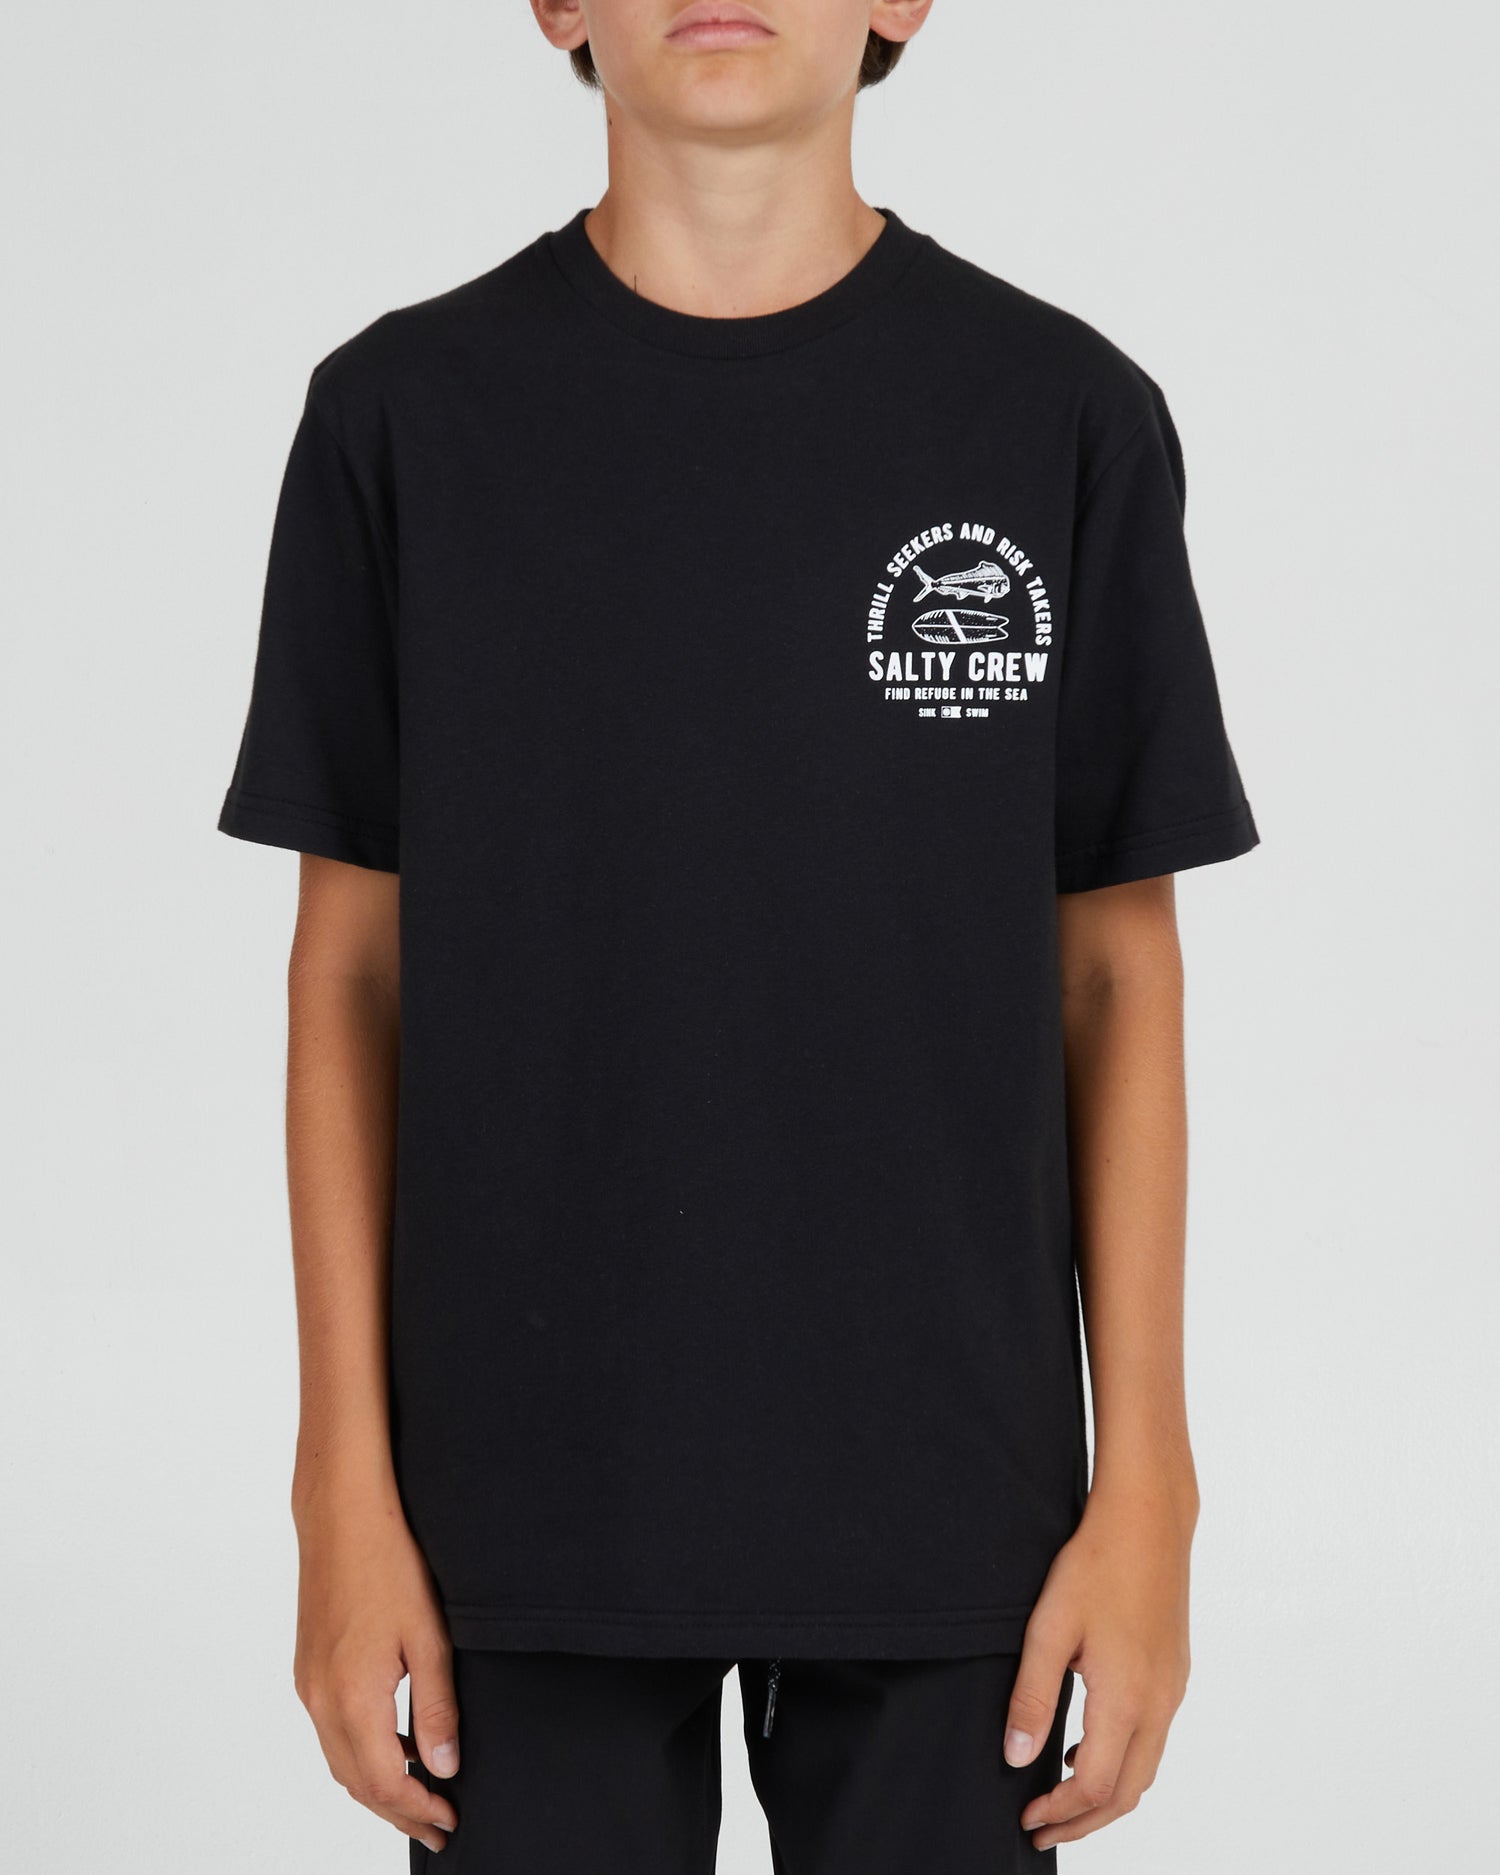 On body front of the Lateral Line Boys Black S/S Tee